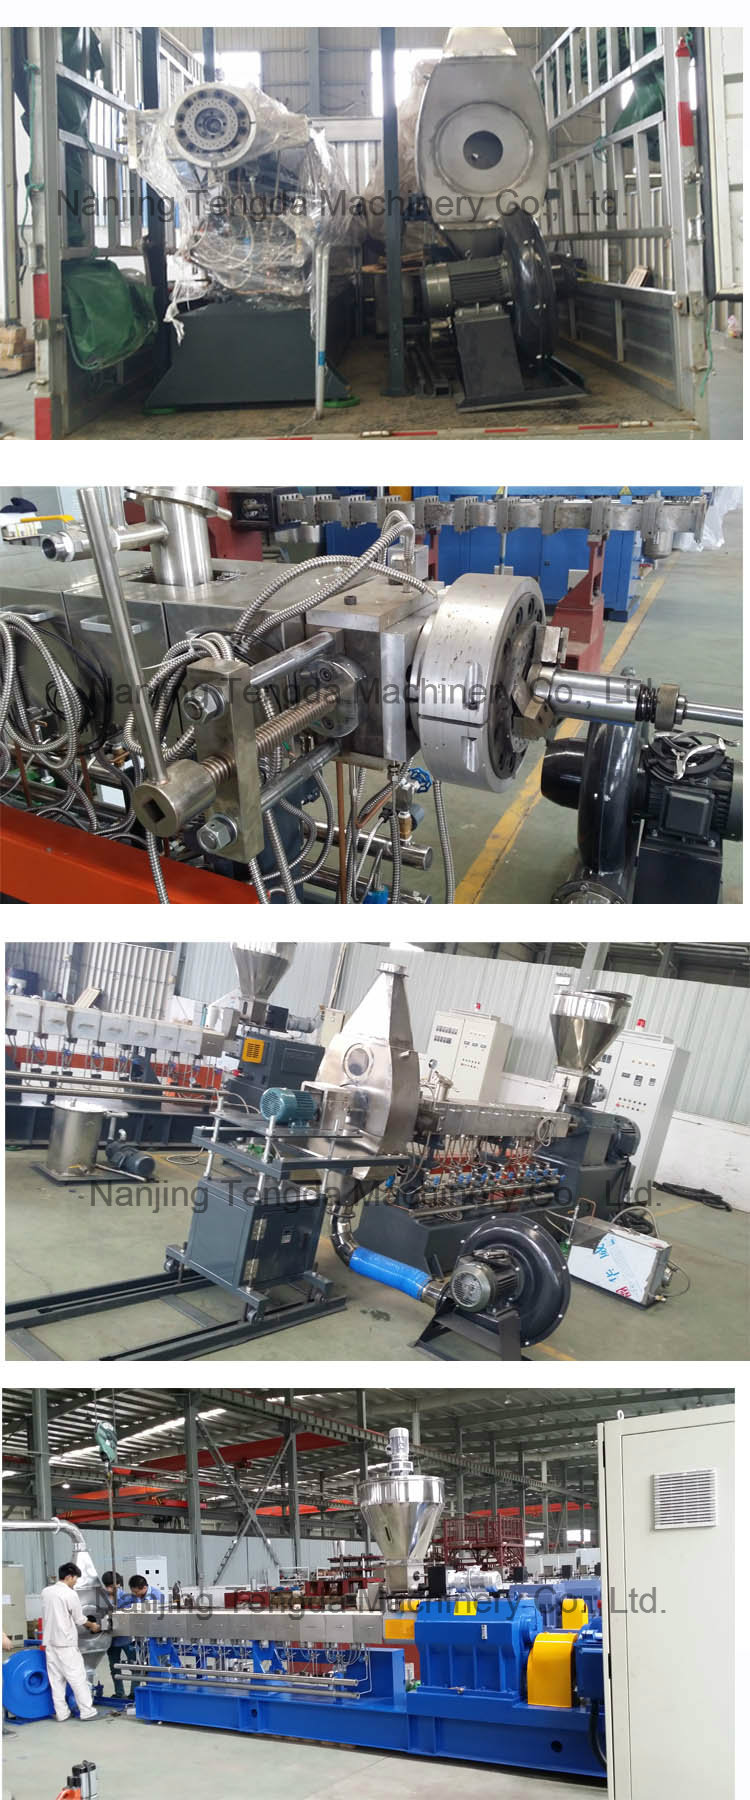 Twin Screw Extruder with Air Cooling Hot Face Pelletizing